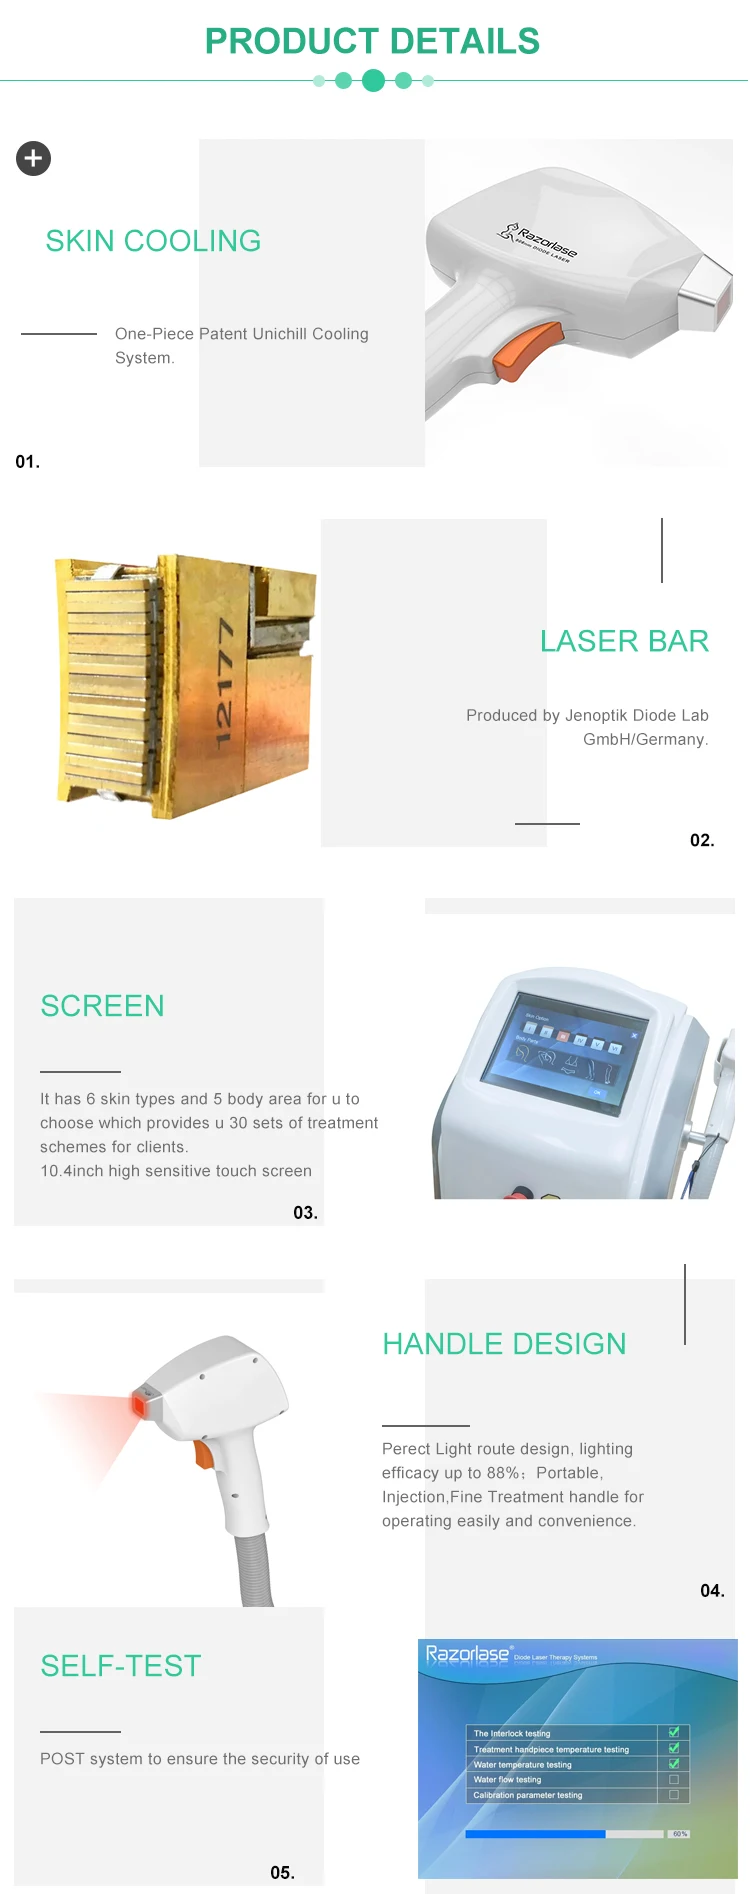 laser one touch price